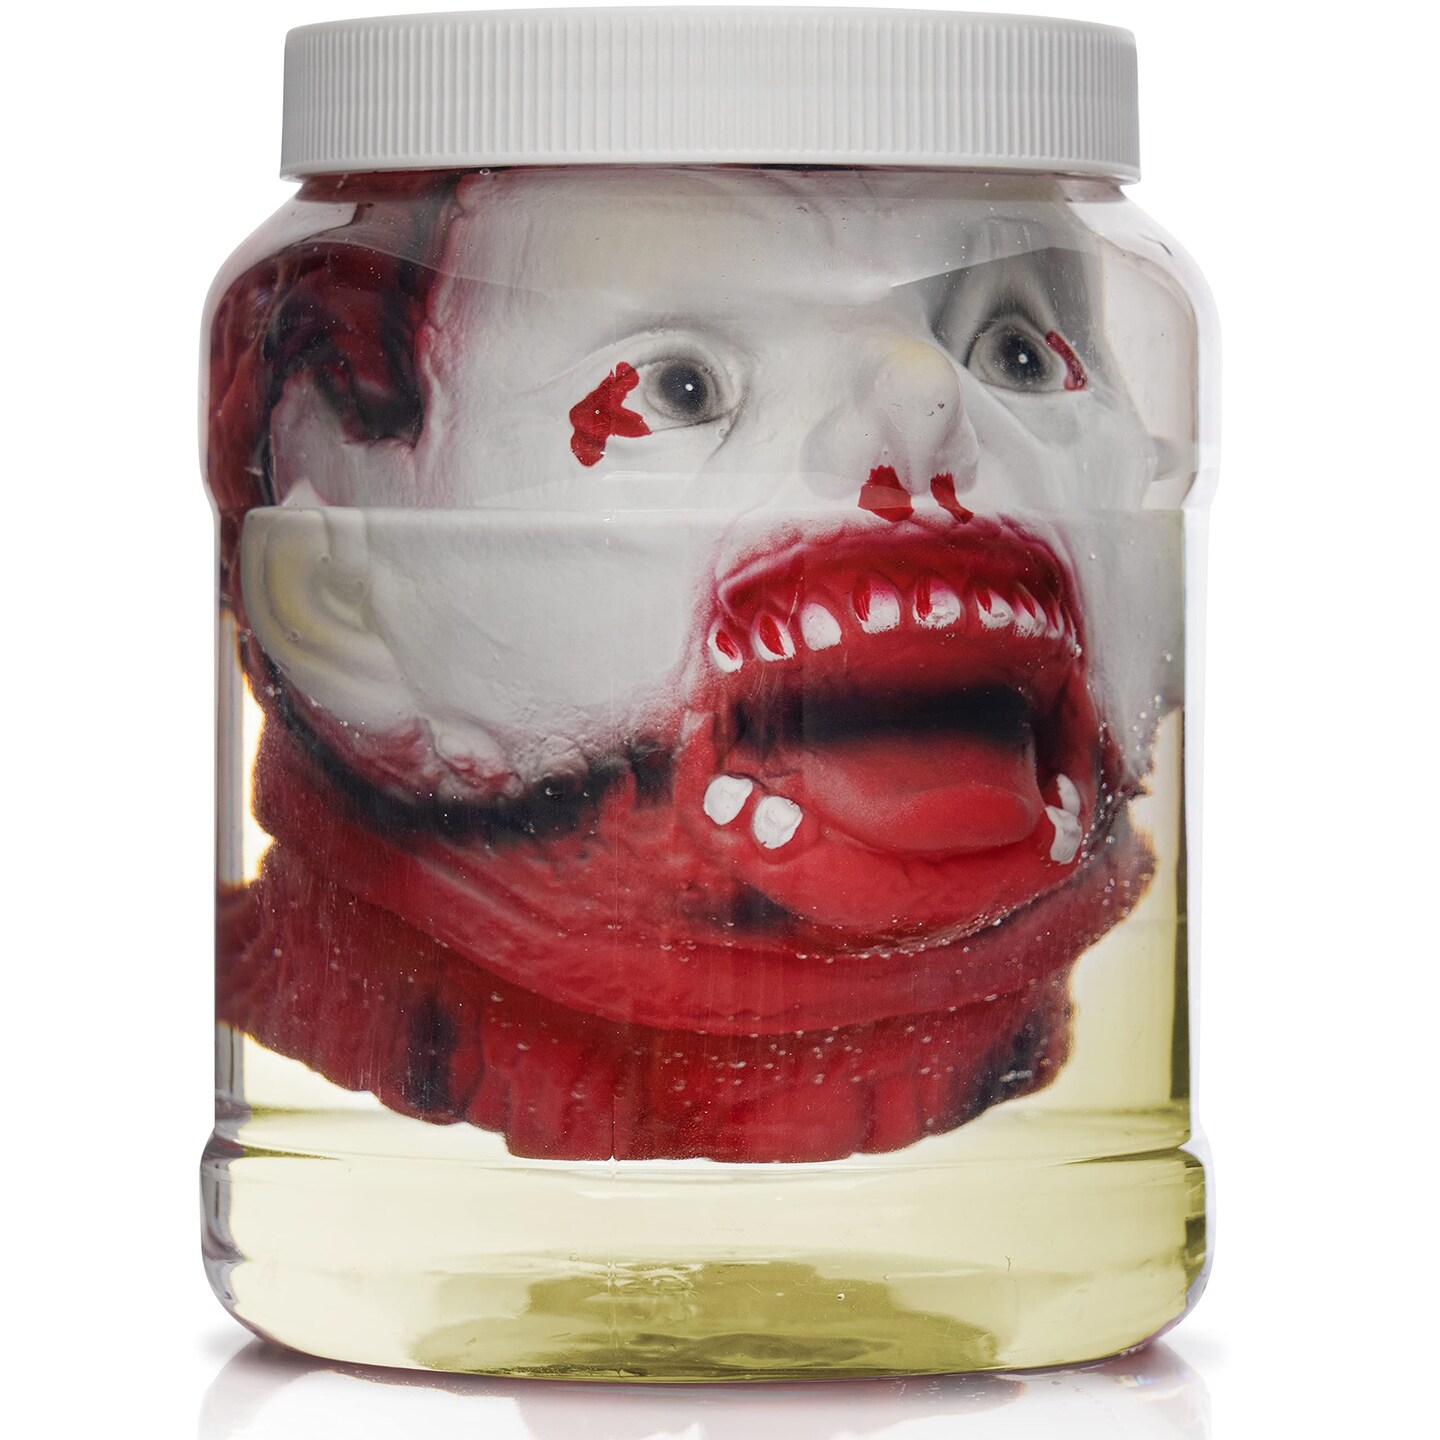 Laboratory Head in Jar - Gory Fake Severed Face Scary Party ...